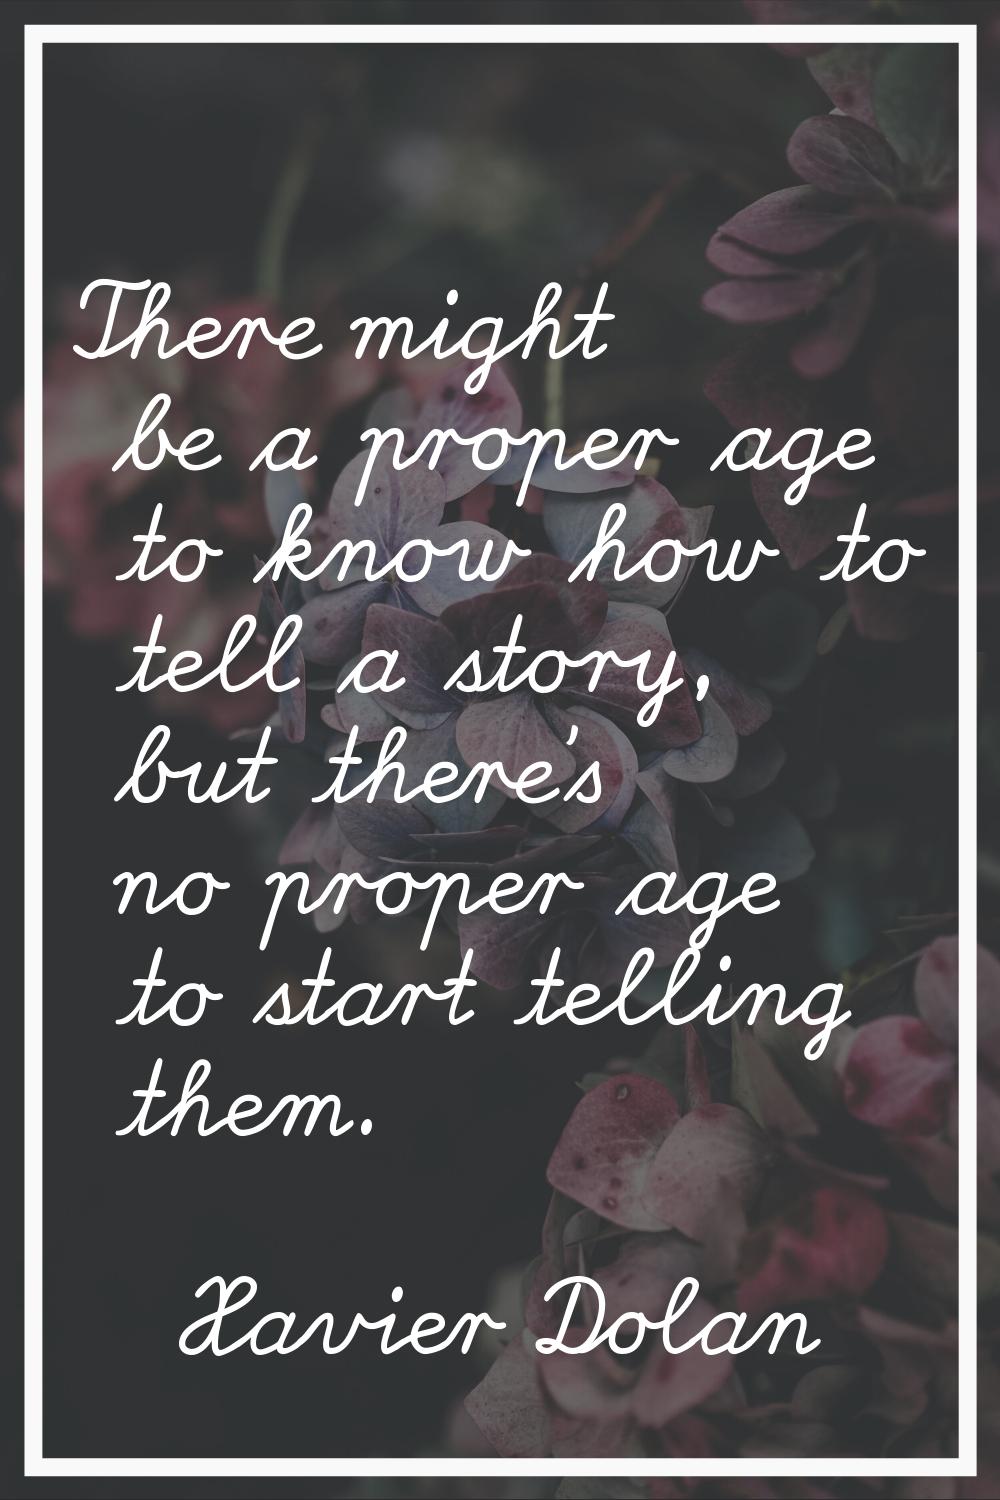 There might be a proper age to know how to tell a story, but there's no proper age to start telling